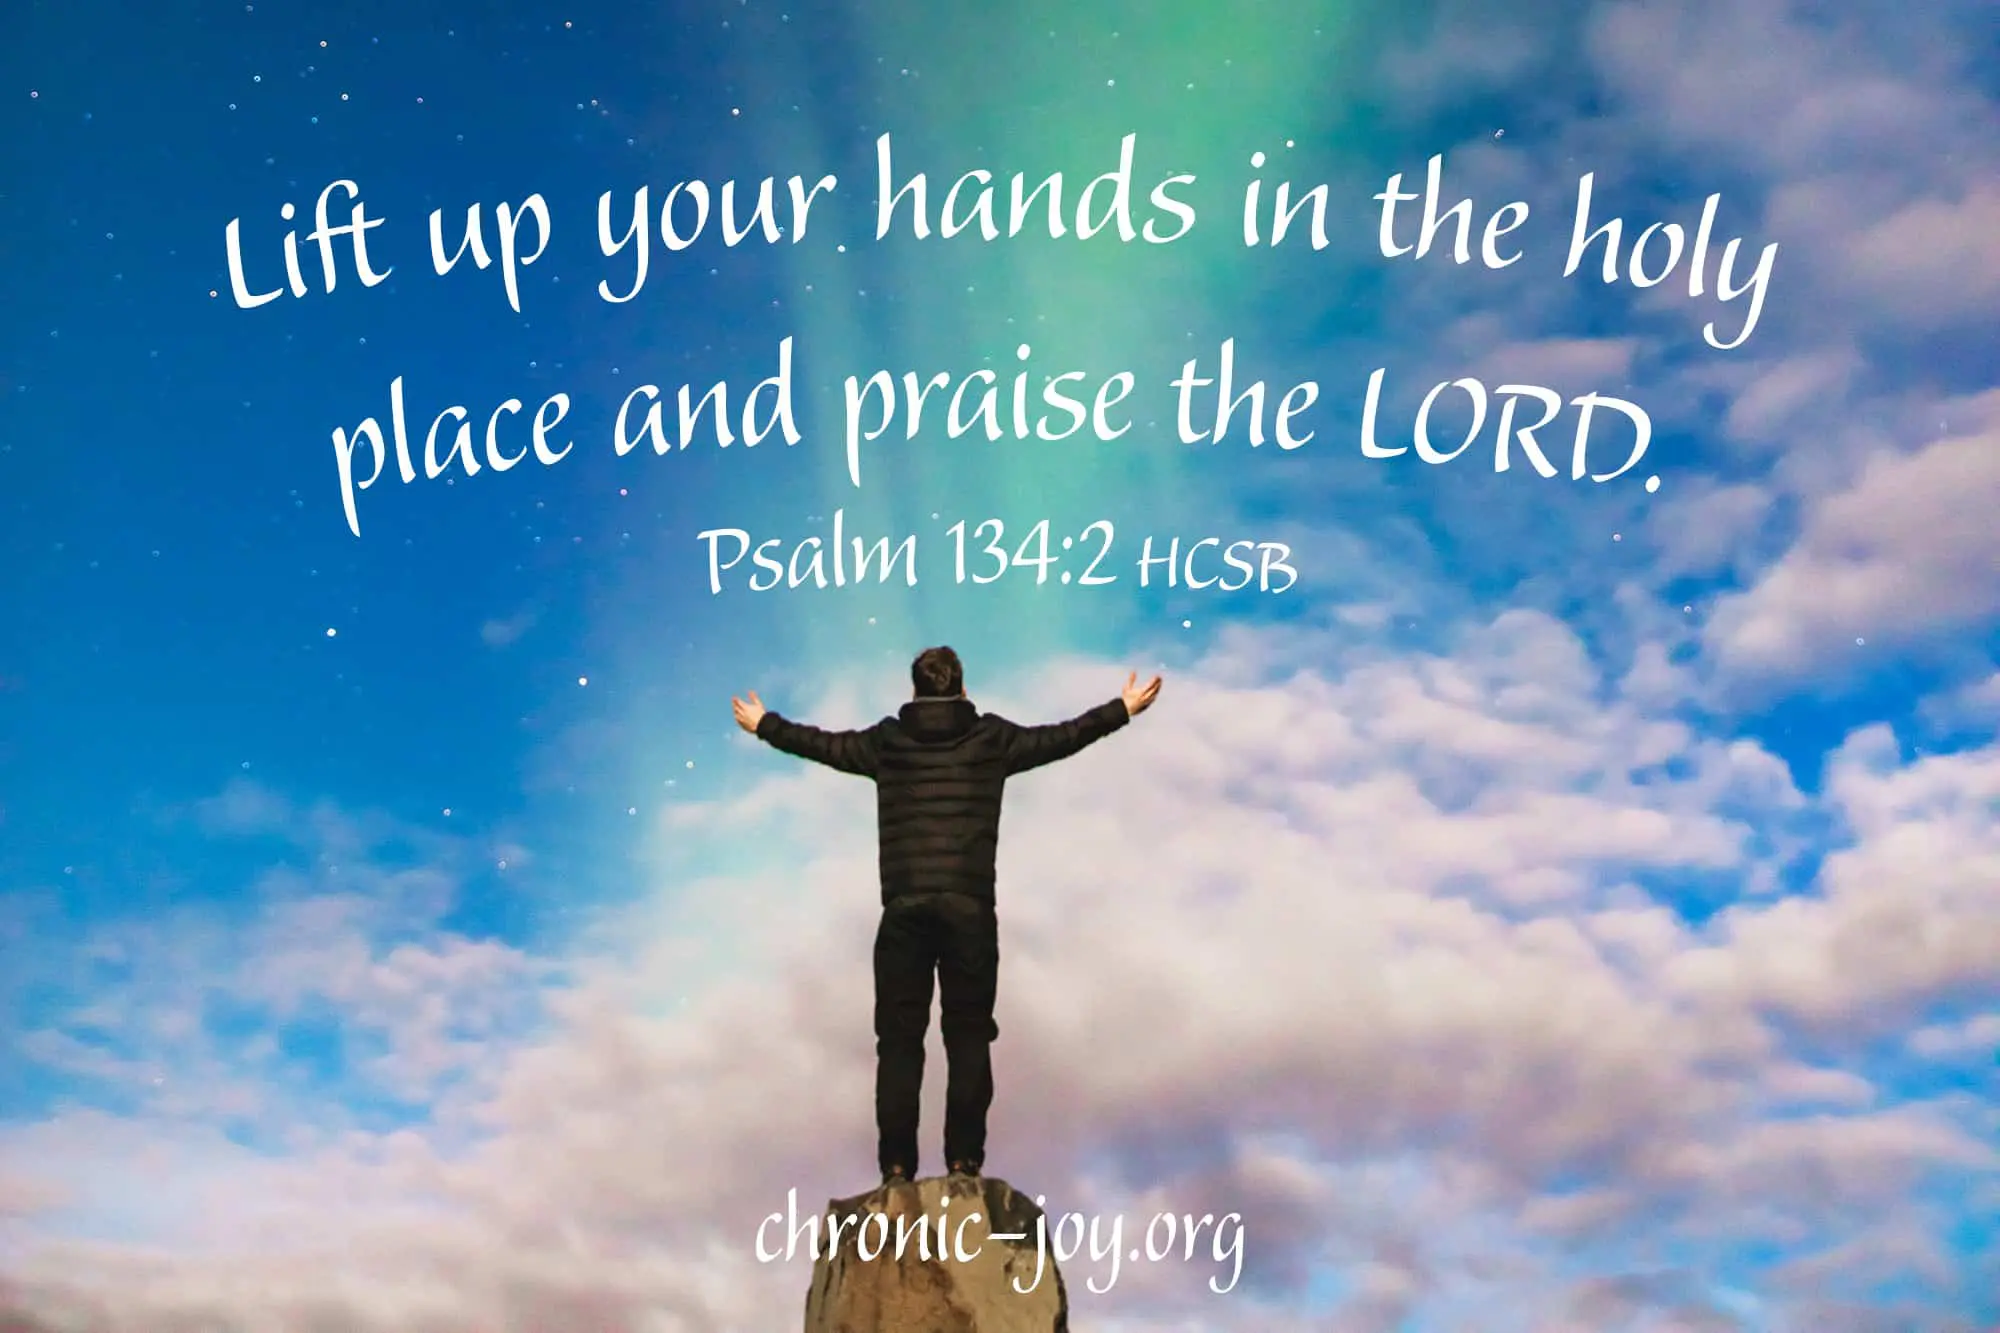 Lift up your hands in the holy place and praise the LORD. Psalm 134:2 HCSB